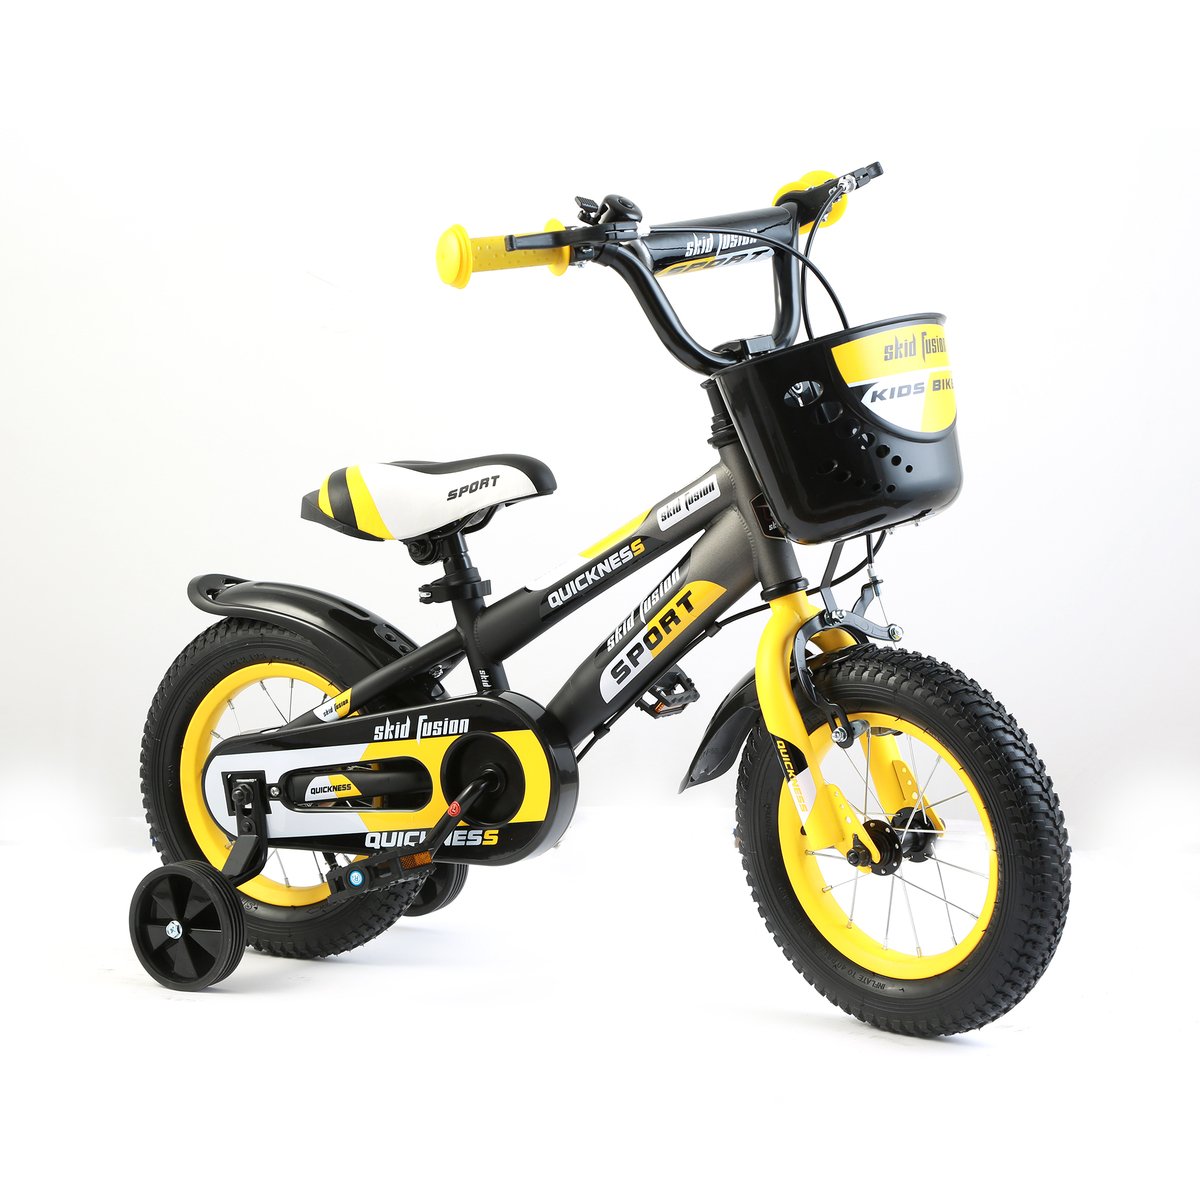 Skid Fusion Kids Bicycle 12Inch WLN1235